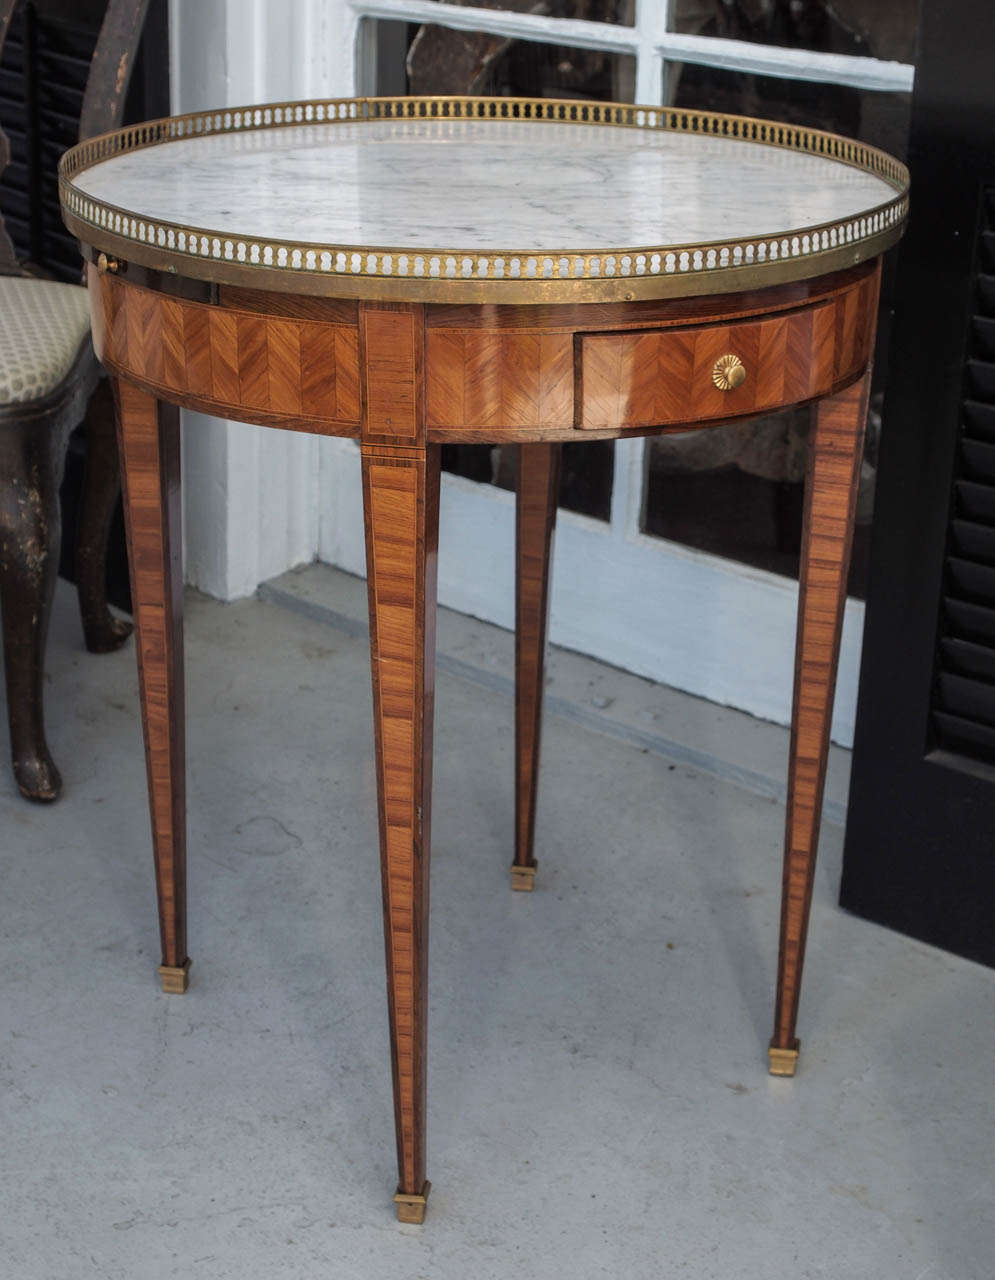 French Marquetry Bouilliotte table with brass gallery and marble top. two drawers and two candle stands pull out with bronze sabot Early 19th c. in the 
Louis XVI style